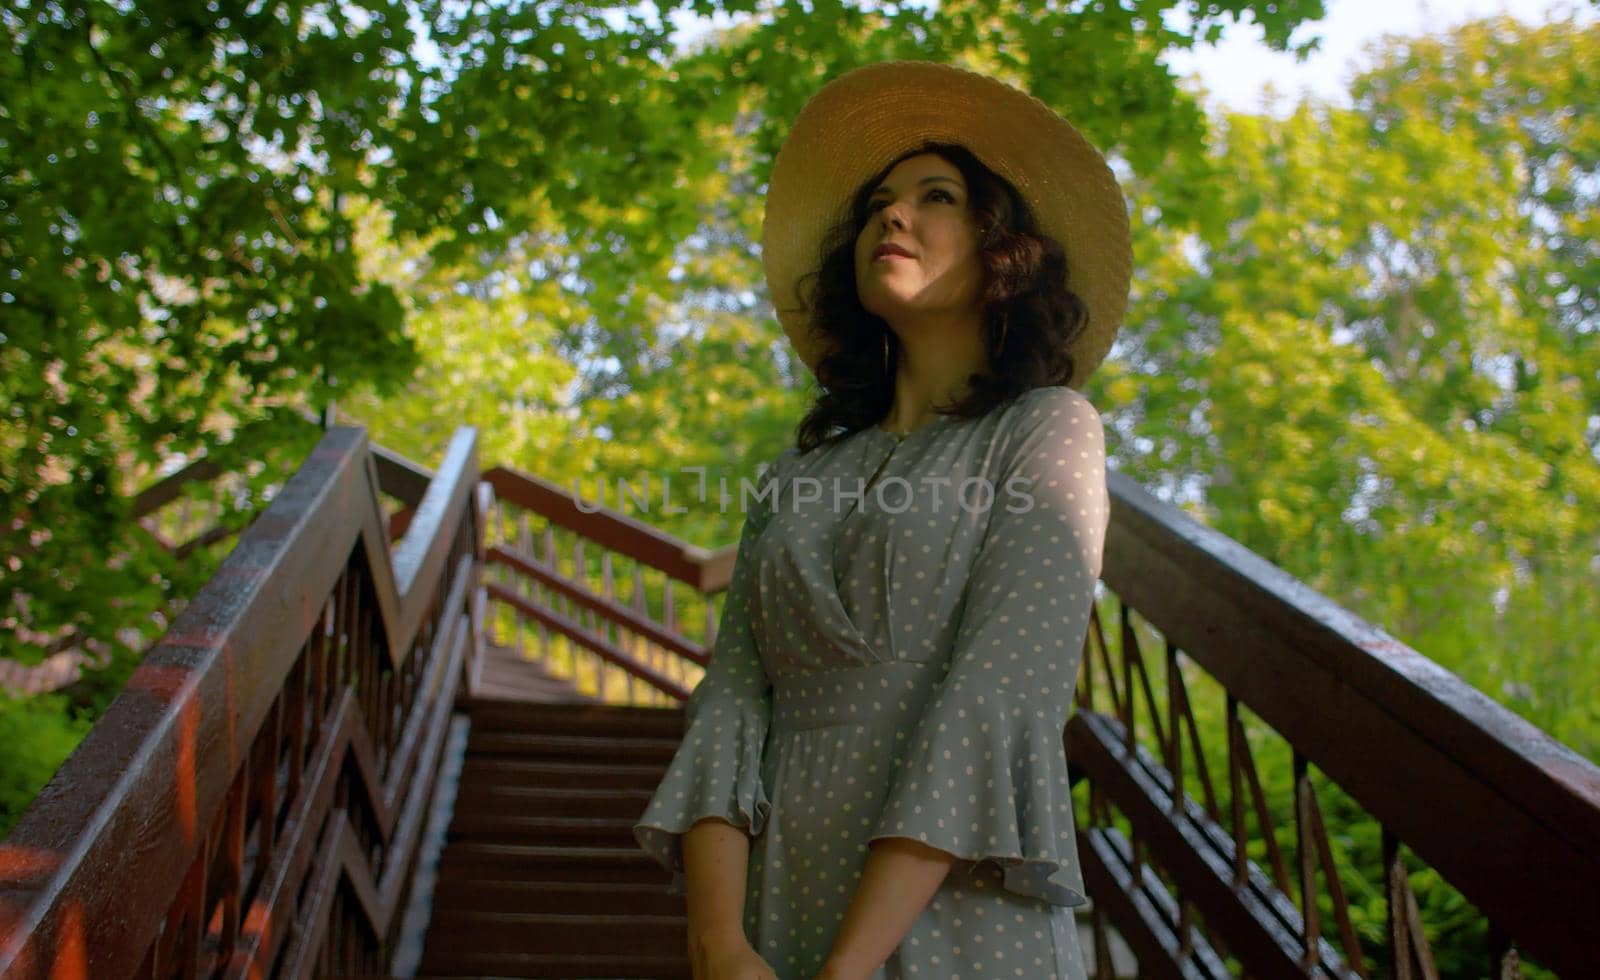 Beautiful woman in a straw hat and old fashion dress posing on the stairs